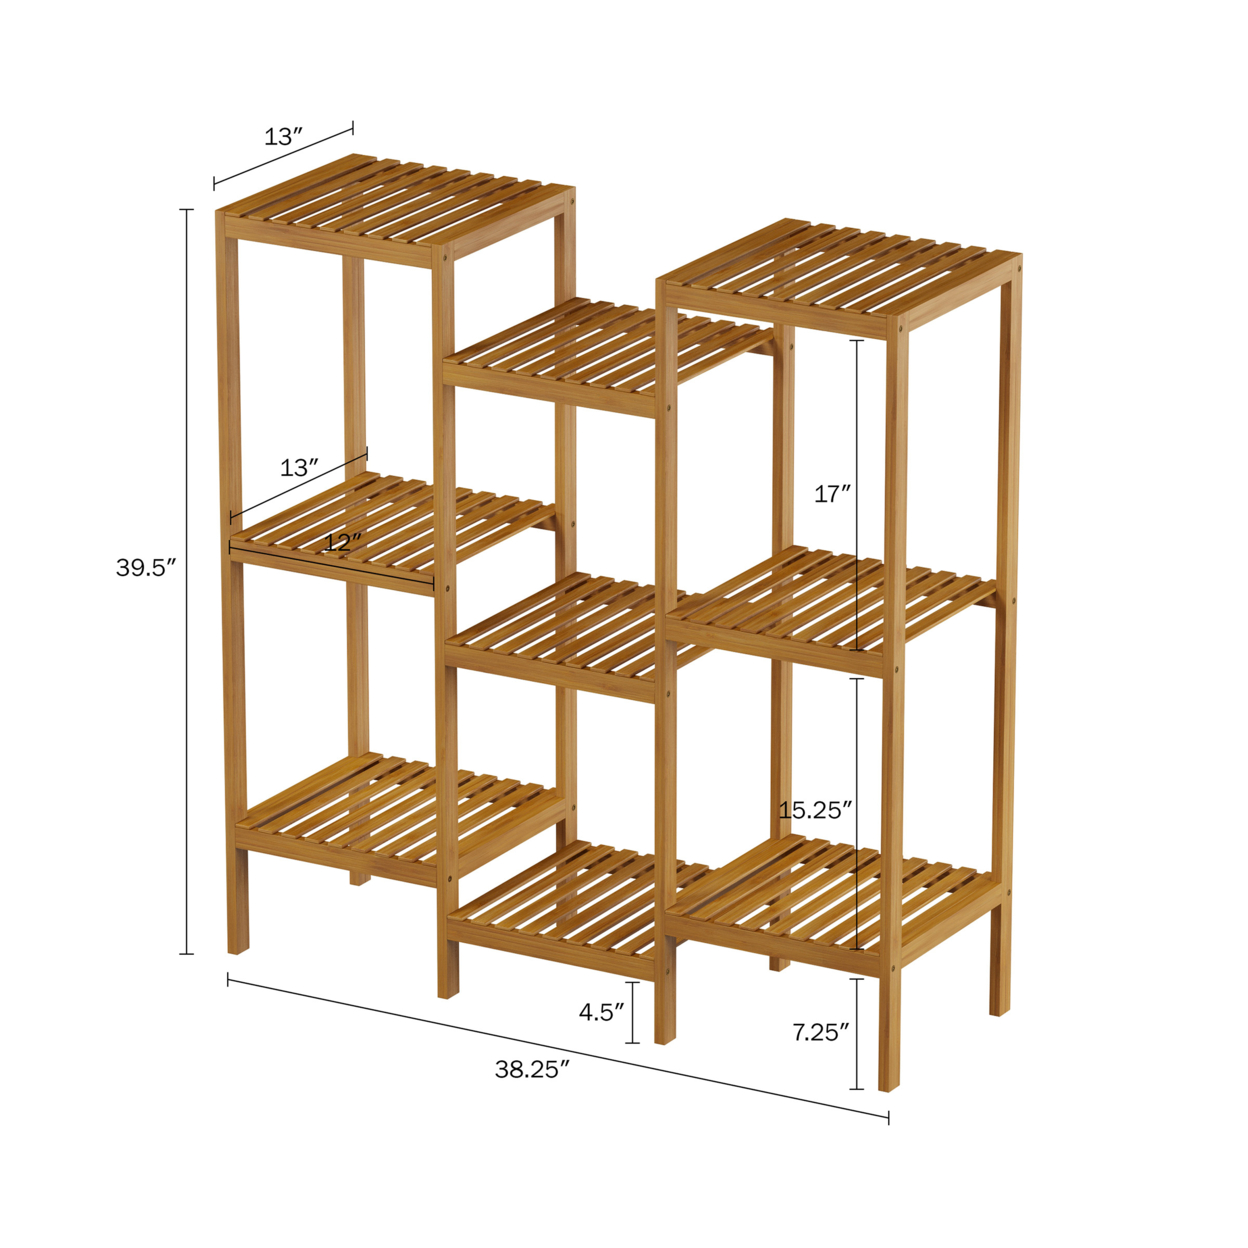 Multi-Level Plant Stand-Freestanding 9 Shelf Bamboo Storage Rack-Indoor/Outdoor Shelving Unit For Flowerpots, Planters, Shoes & Display